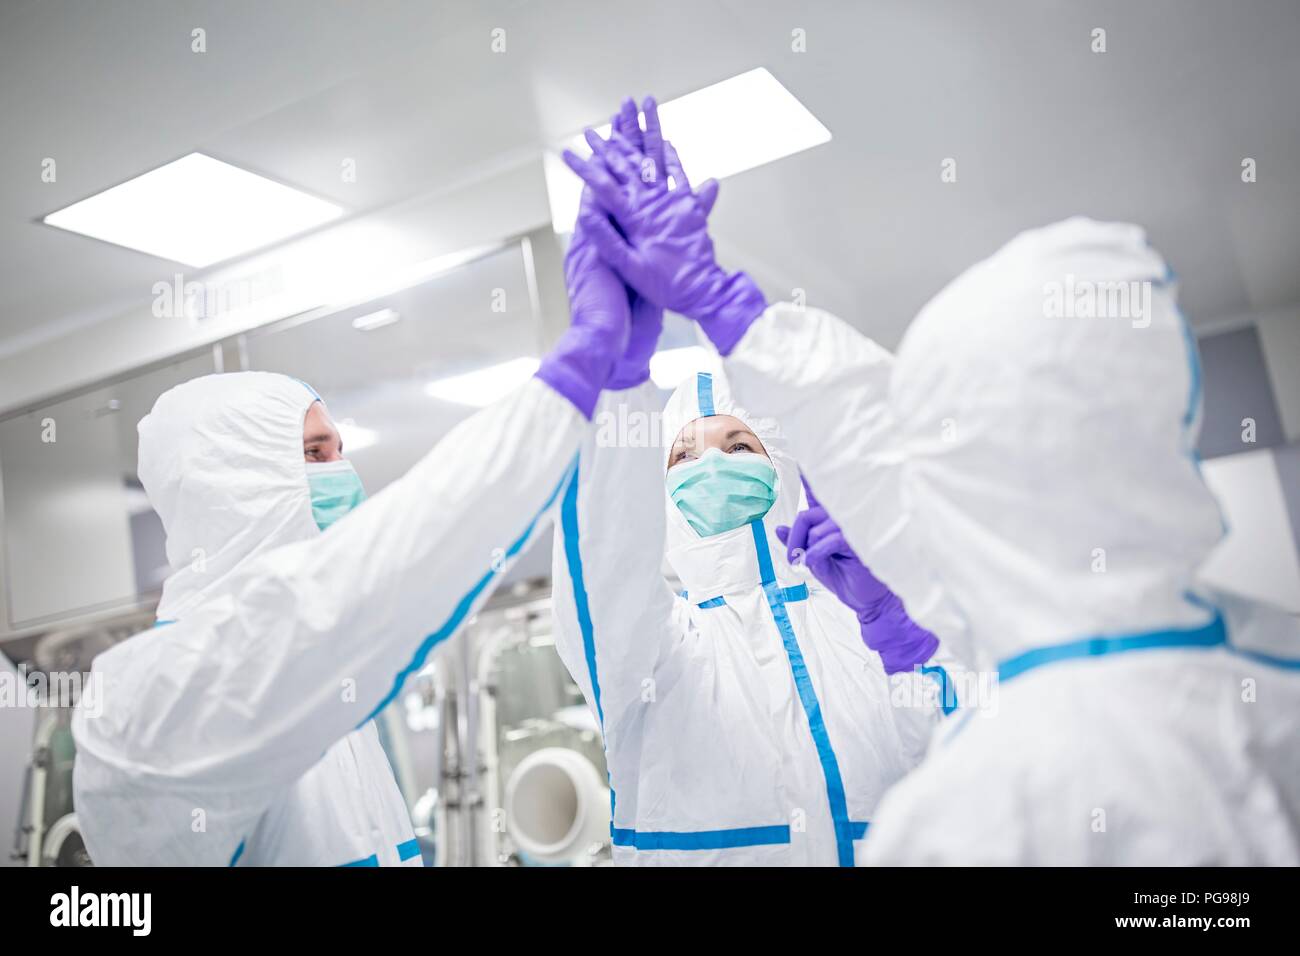 Lab technicians in a sterile environment high-fiving. Stock Photo